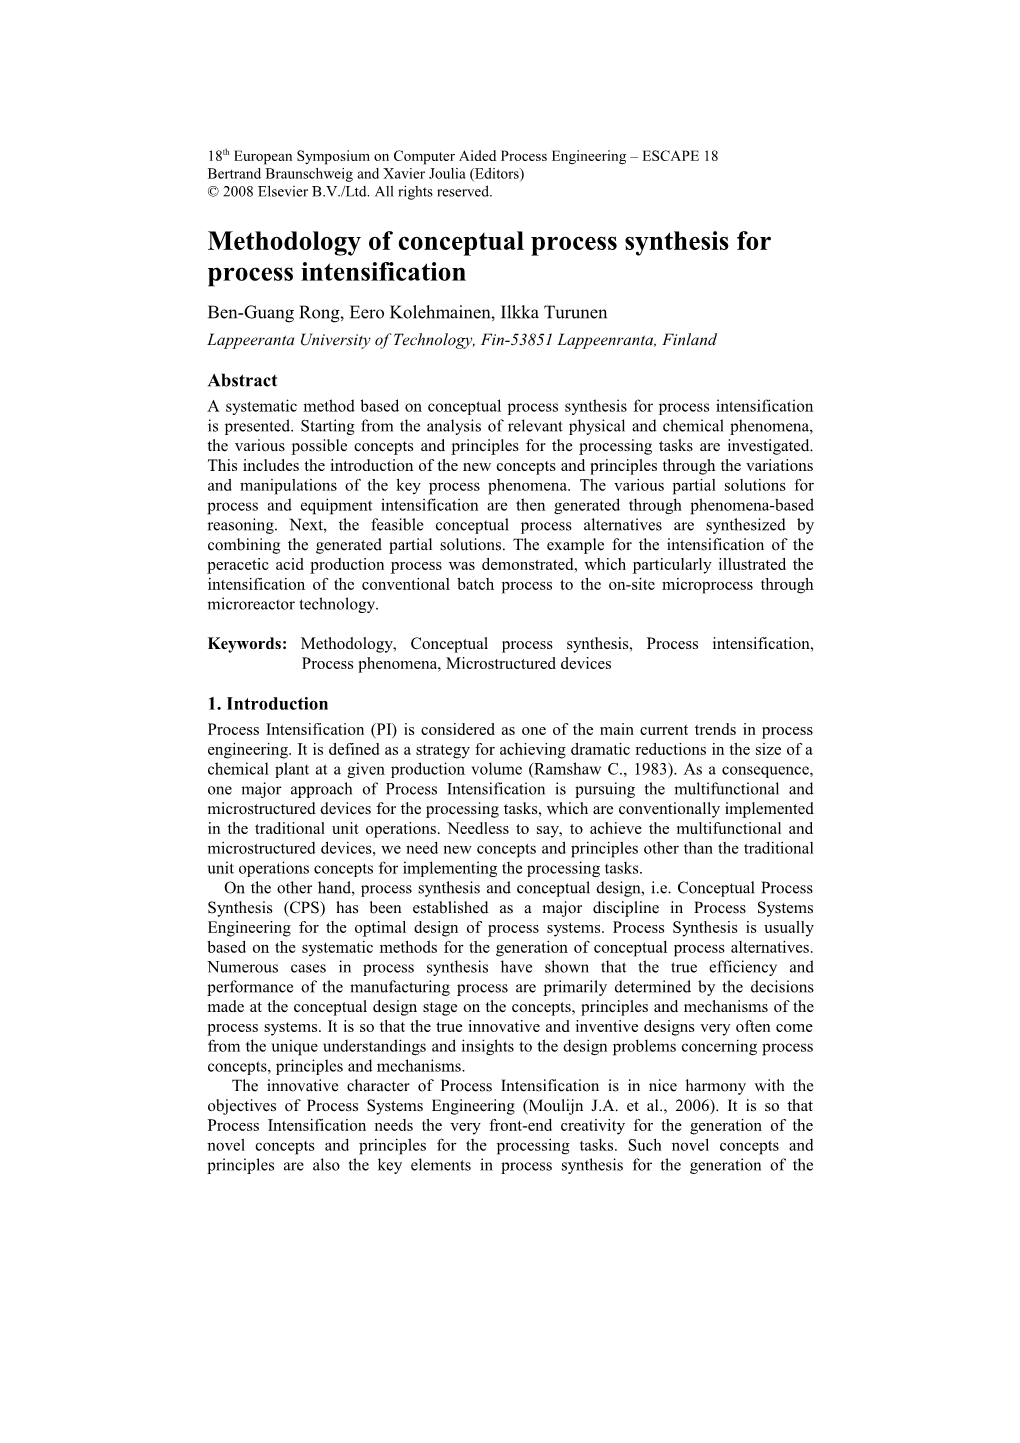 Methodology of Conceptual Process Synthesis for Process Intensification